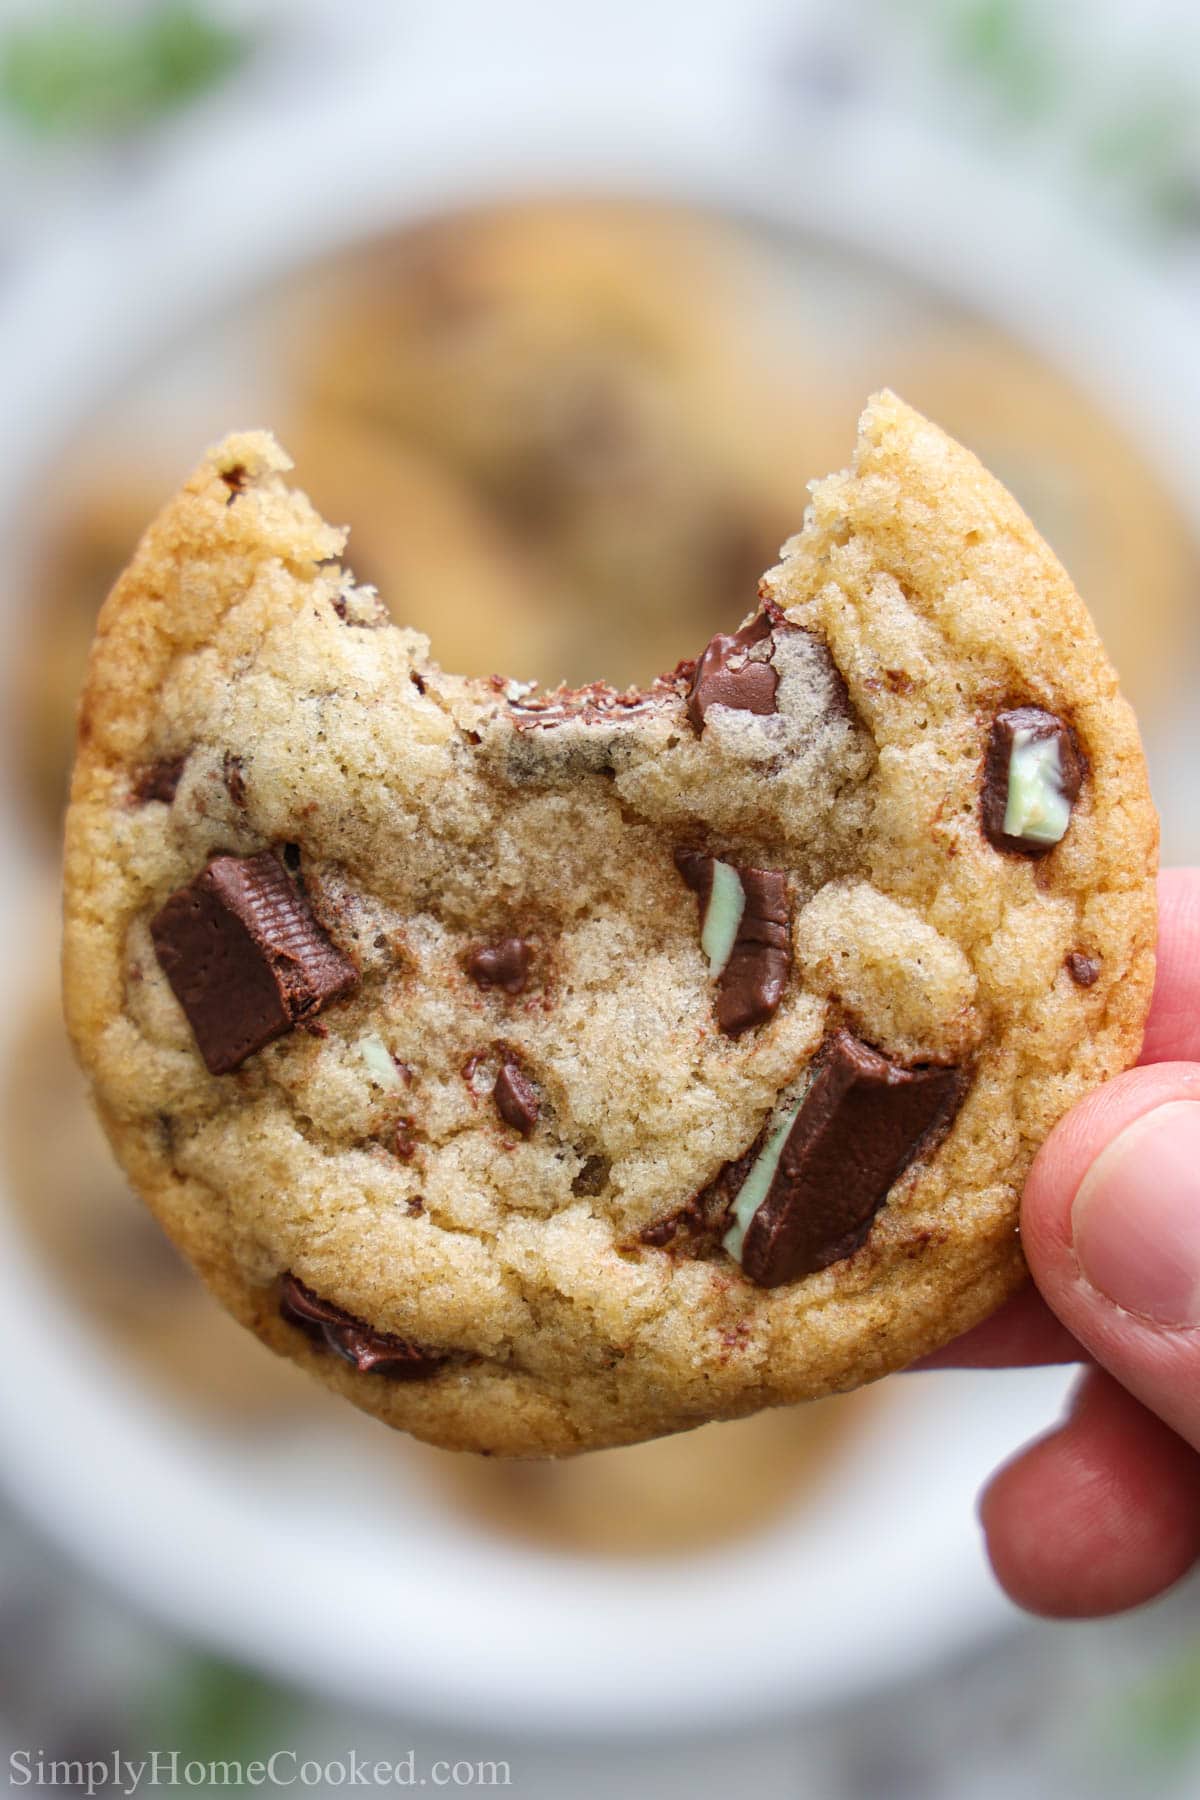 Close up image of a Mint Chocolate Chip Cookie missing a bite.